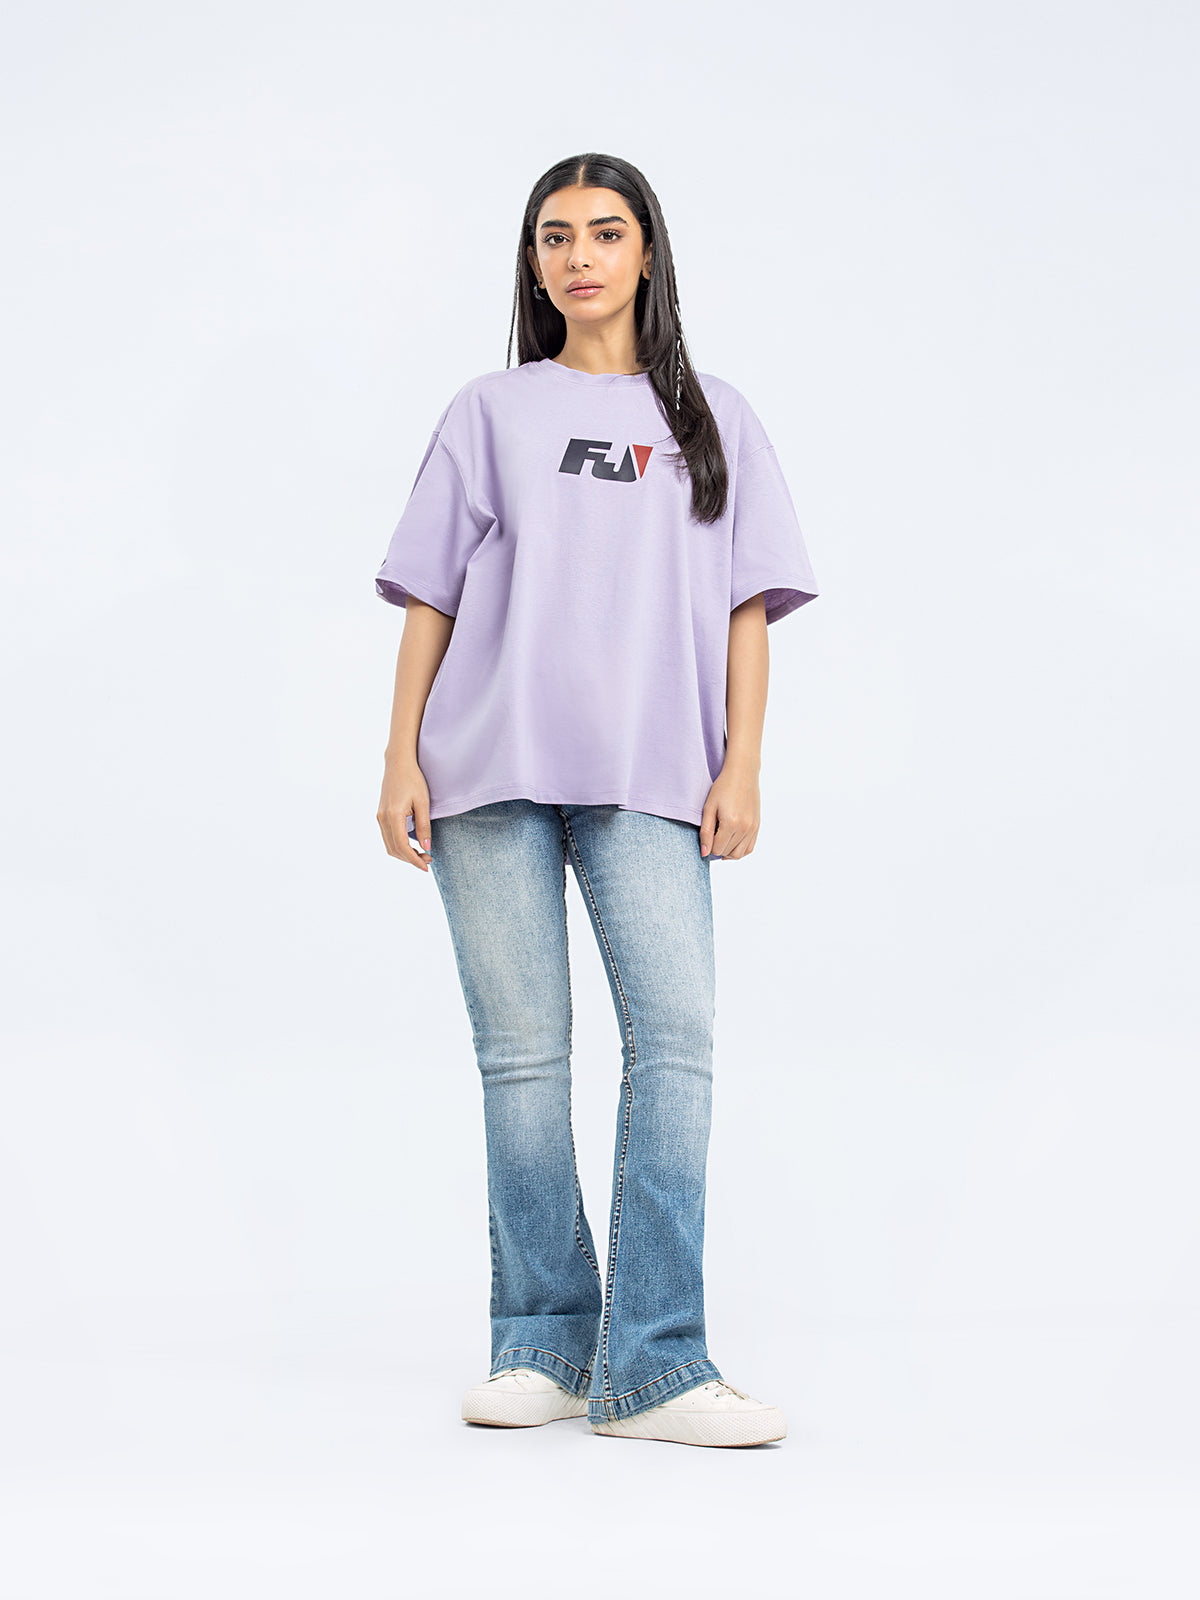 Relax Fit Graphic Tee - FWTGT24-057